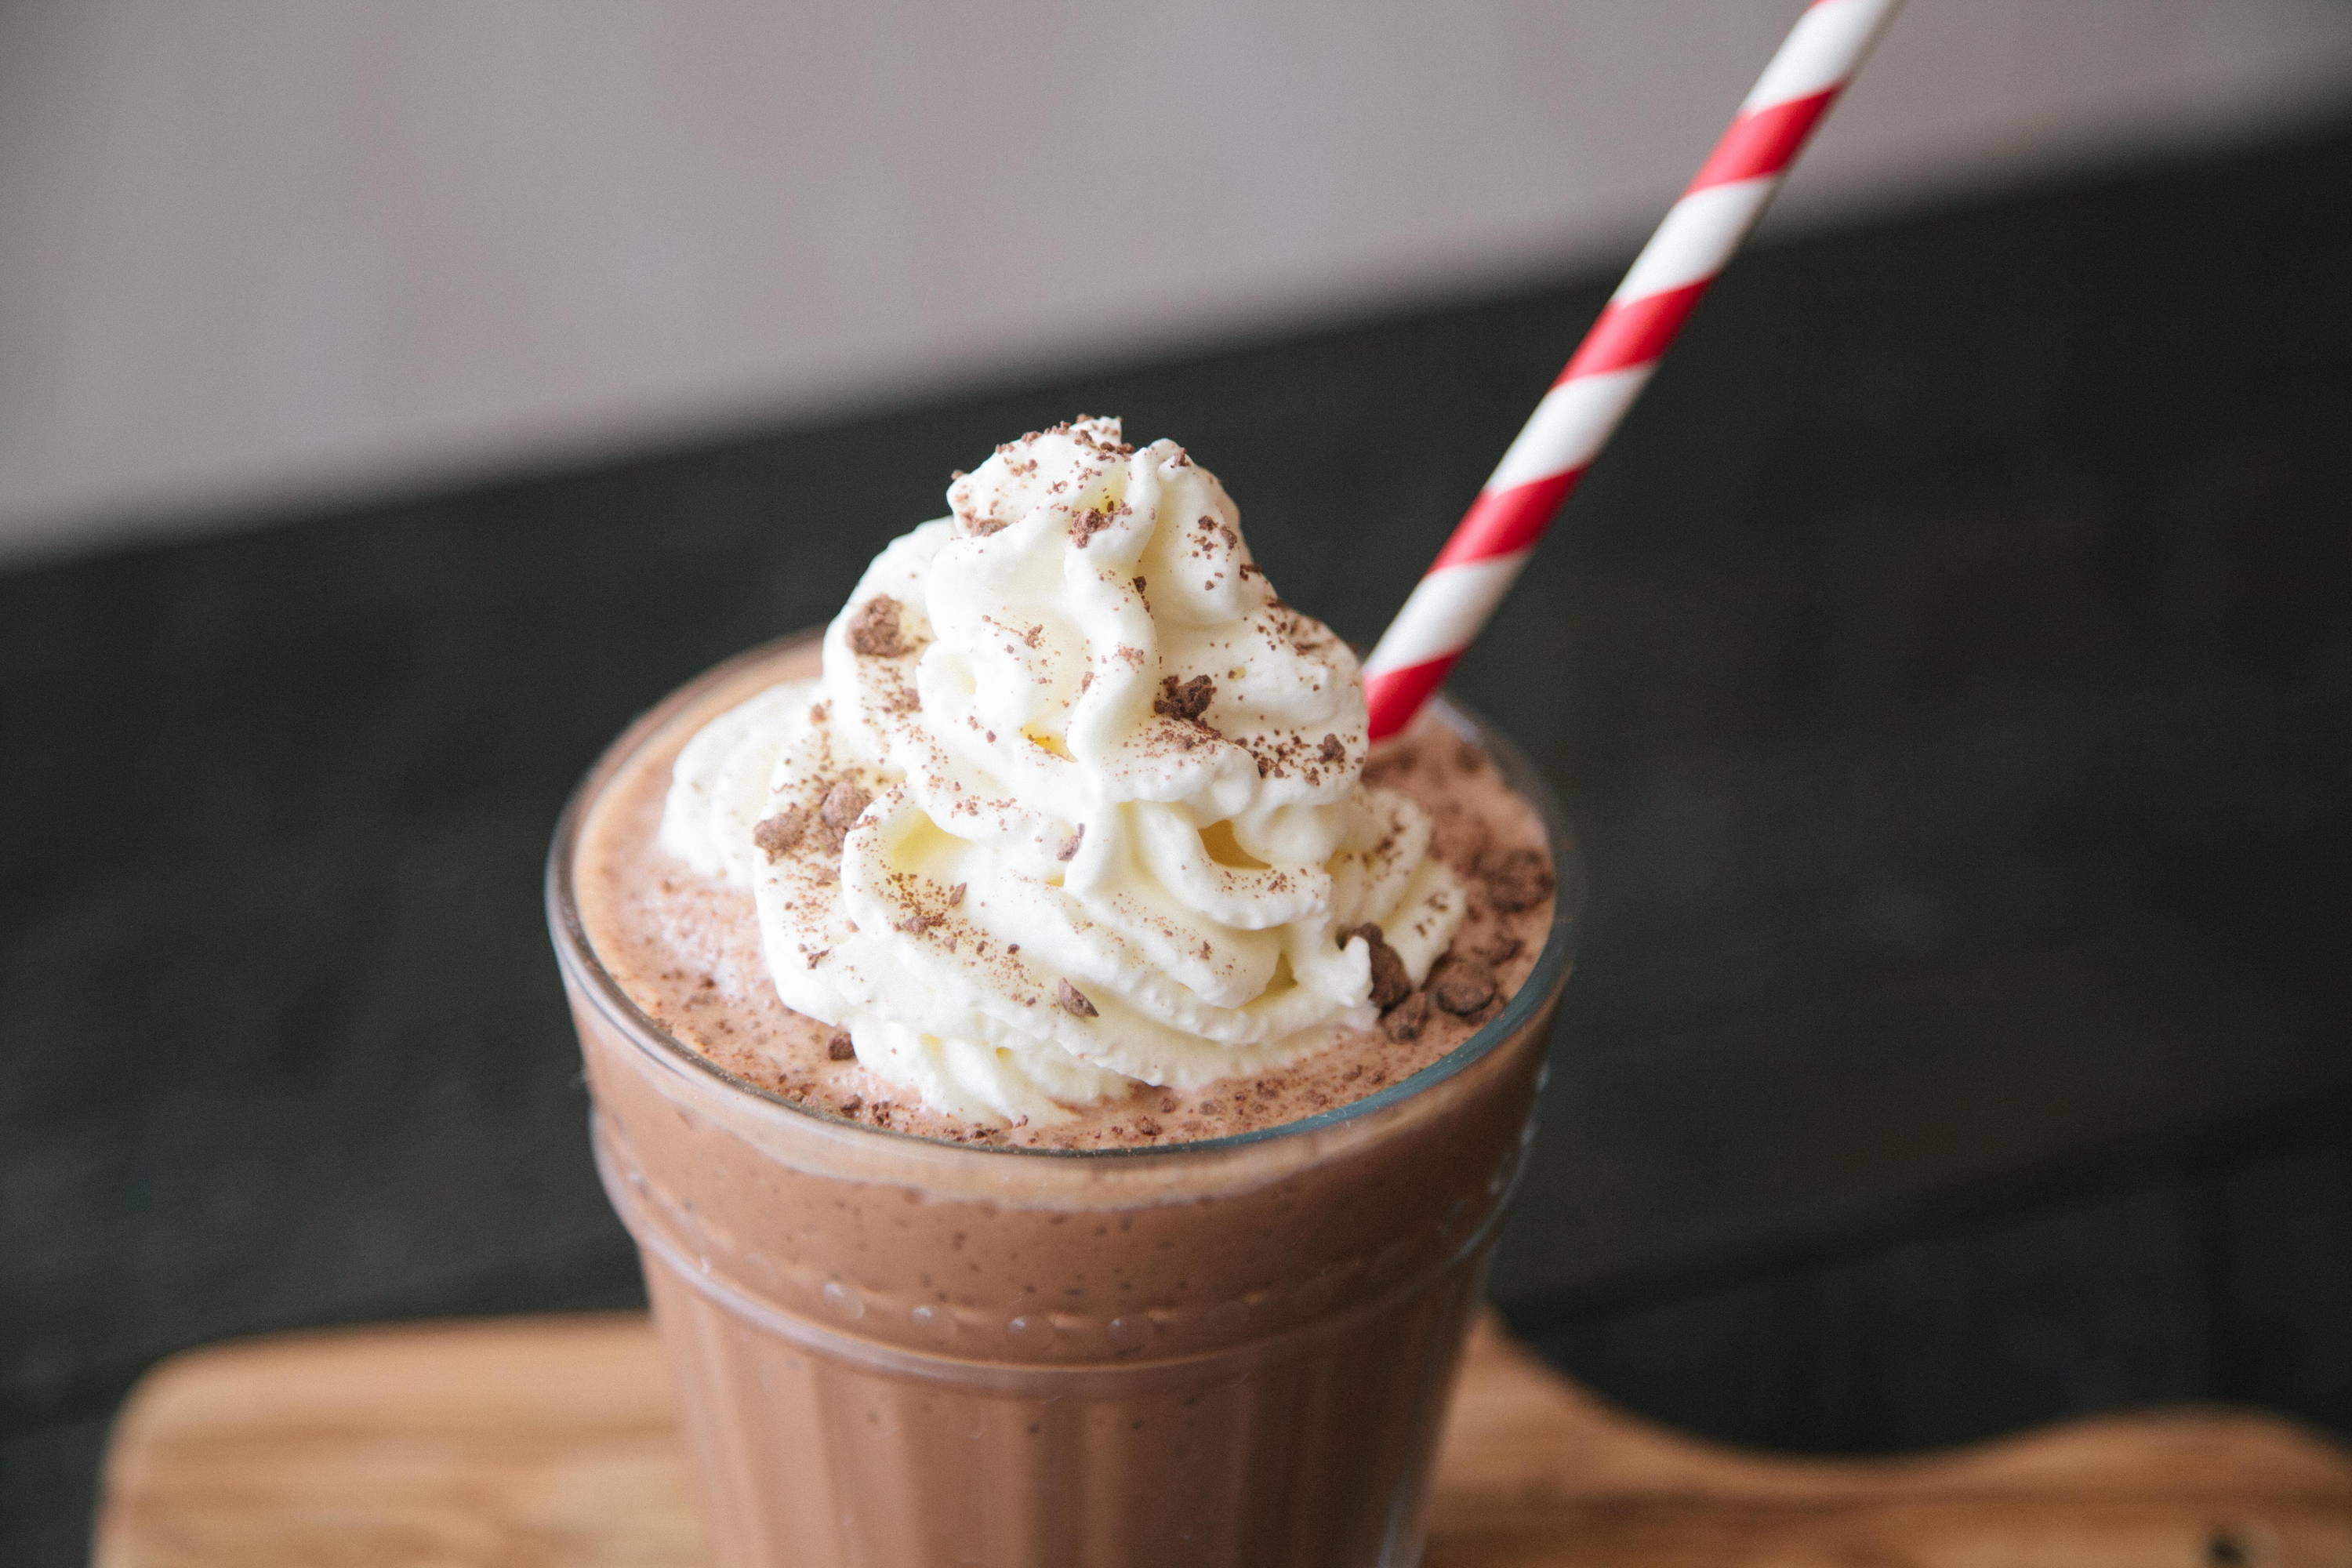 Fun drinking chocolate with whipped cream and striped straw